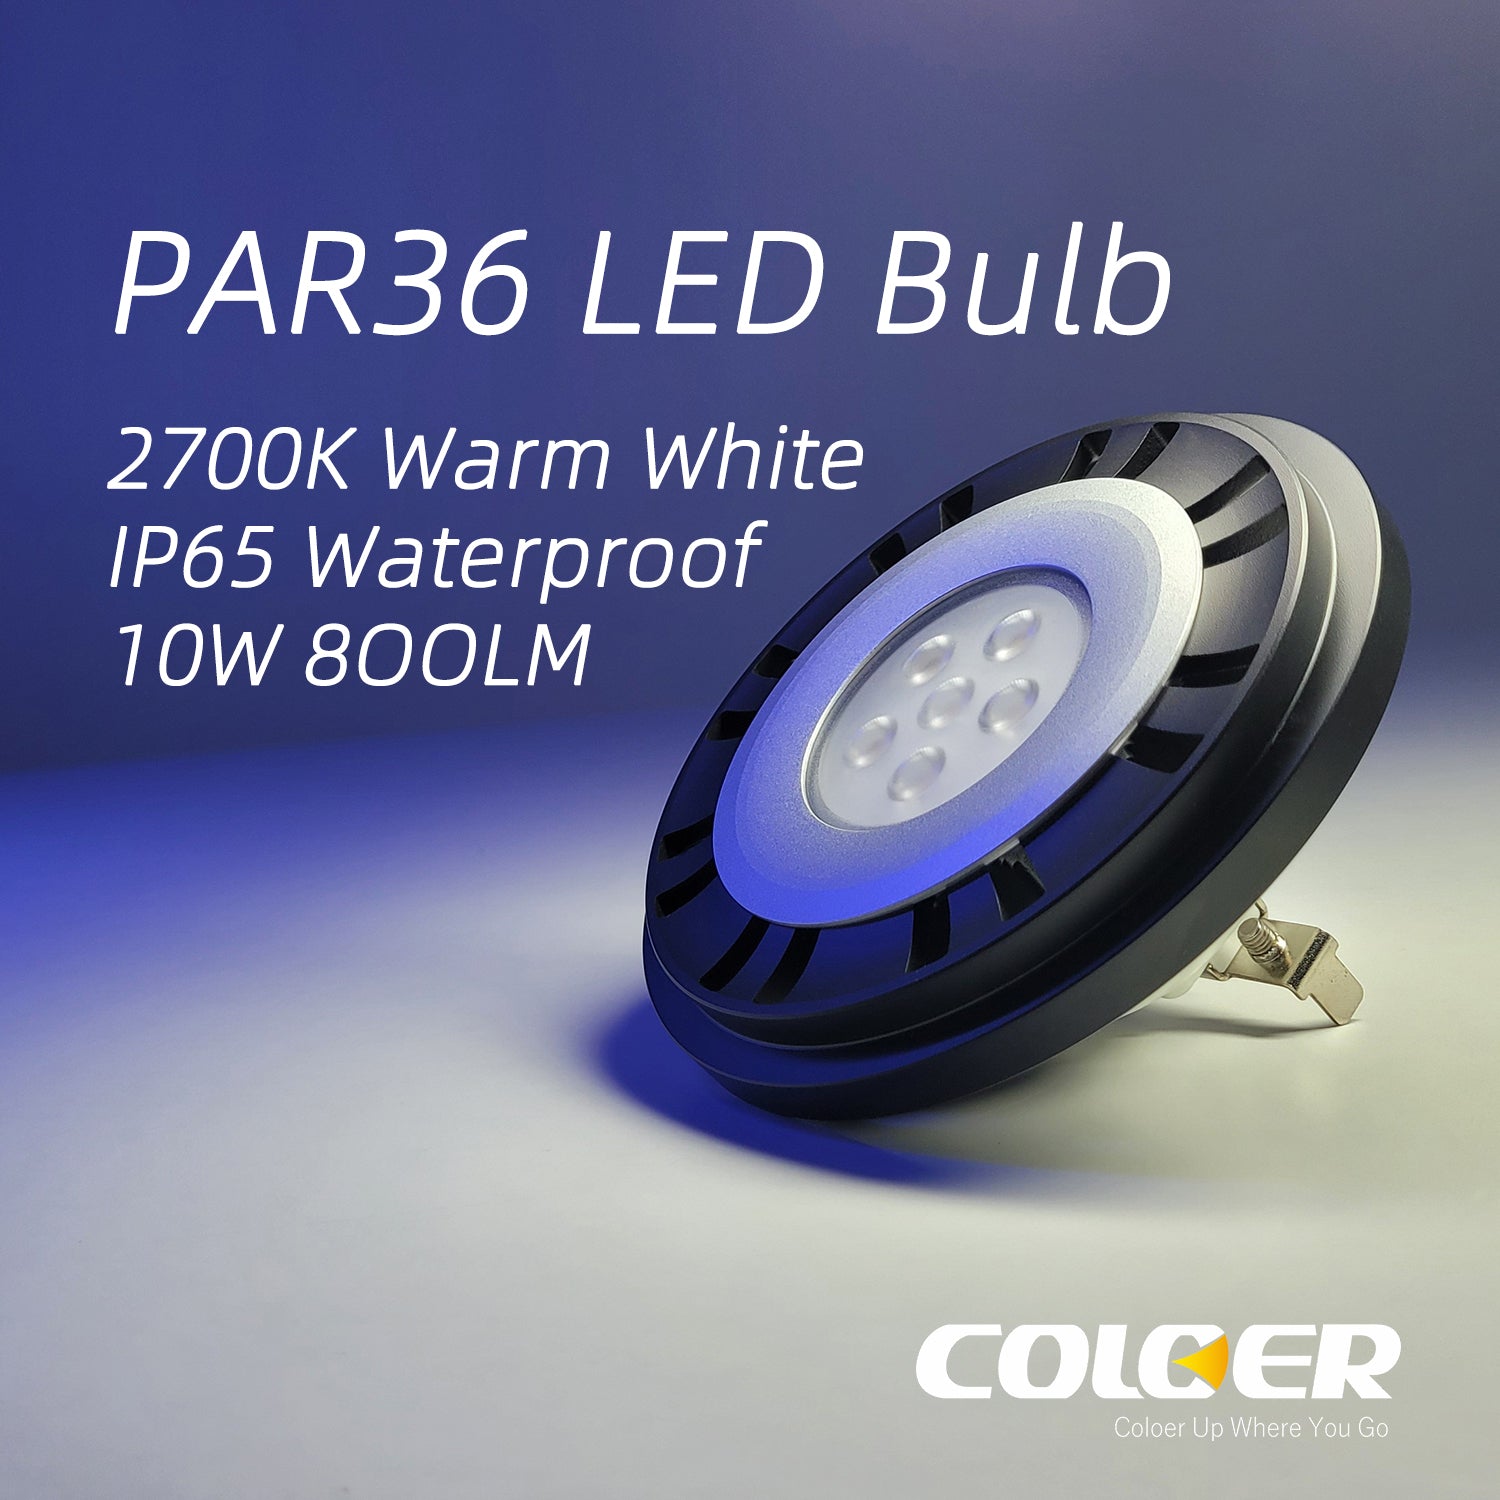 Close-up of COLOER PAR36 LED bulb with features like 2700K warm white light, IP65 waterproof rating, 10W 800LM output specified in text